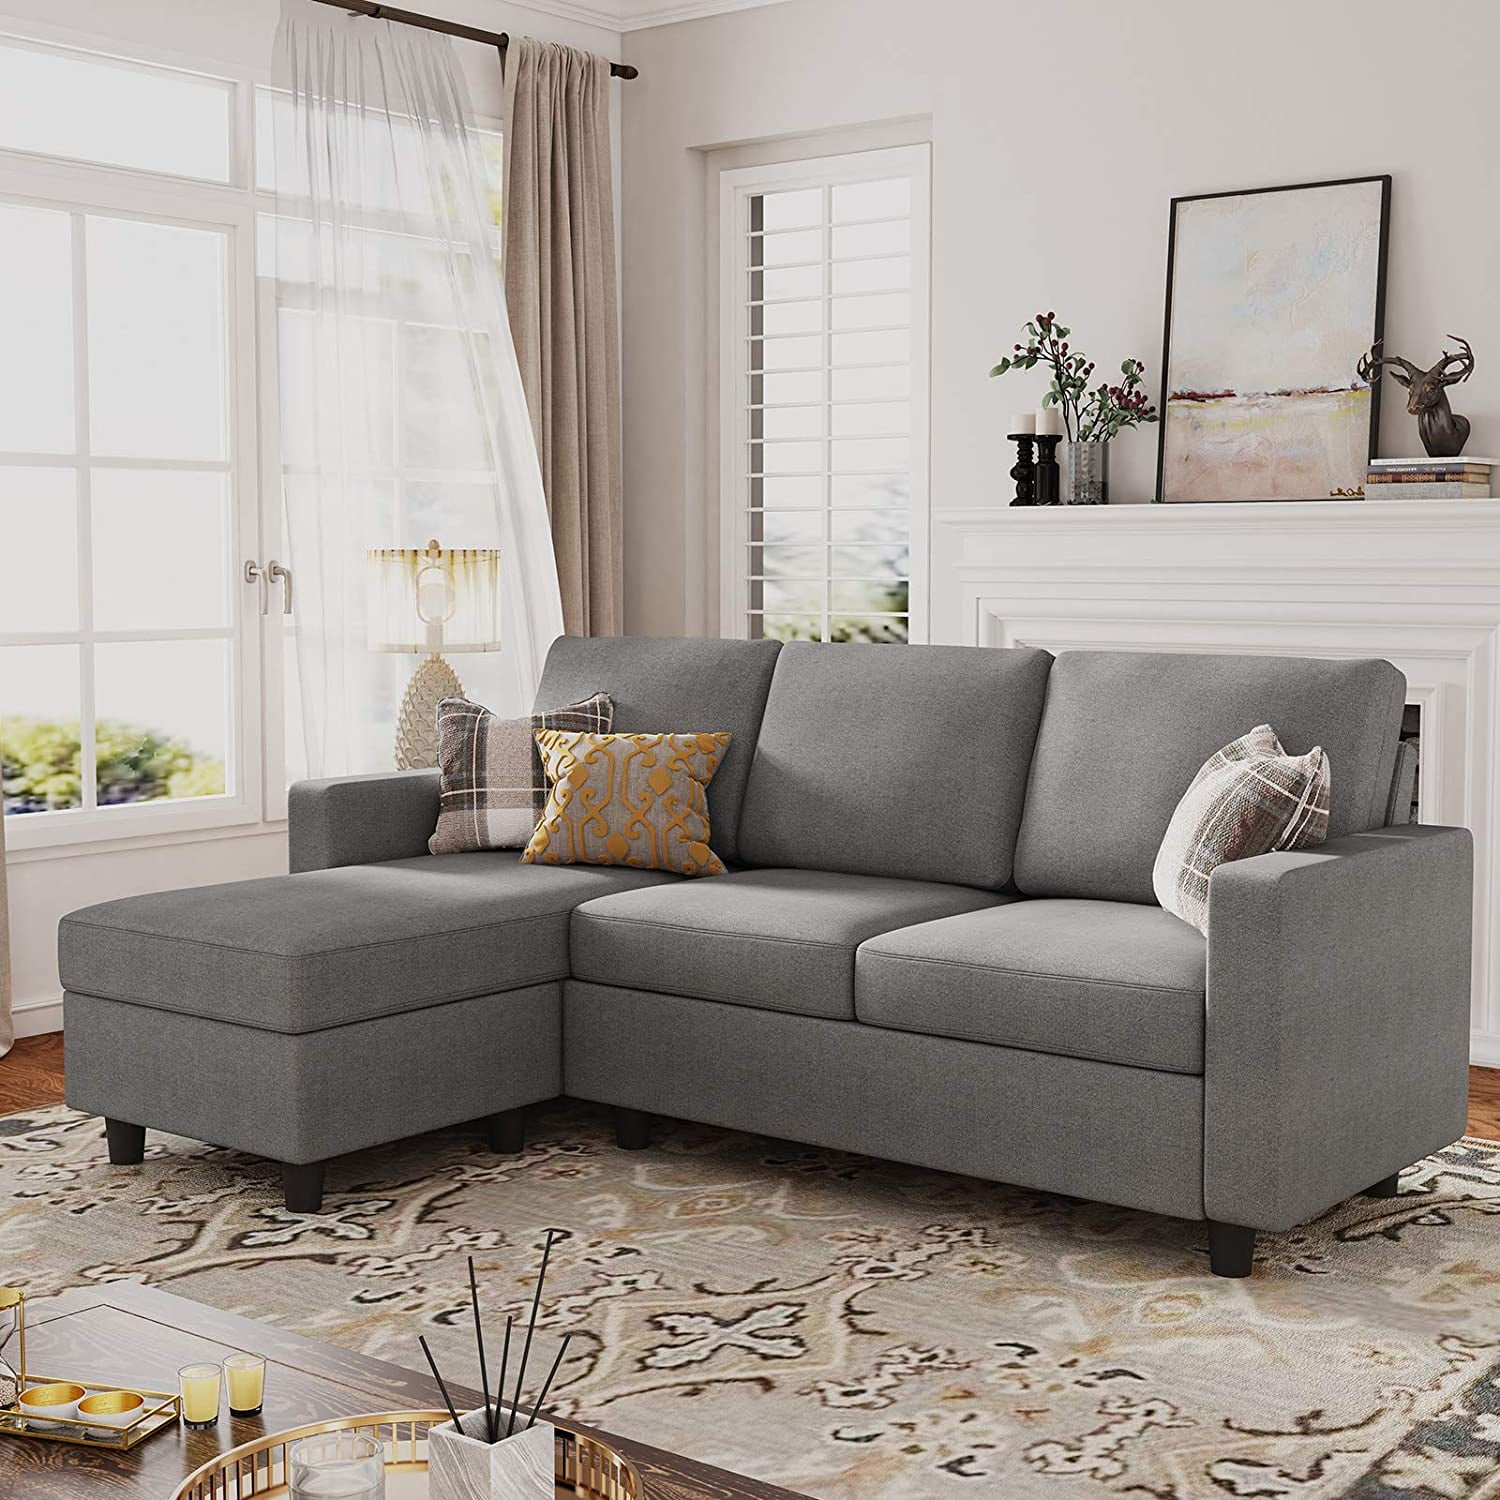 Lilola Home Hilo Fabric Reversible Sectional Sofa with Dropdown Armrest,  Cupholder, and Storage Ottoman 